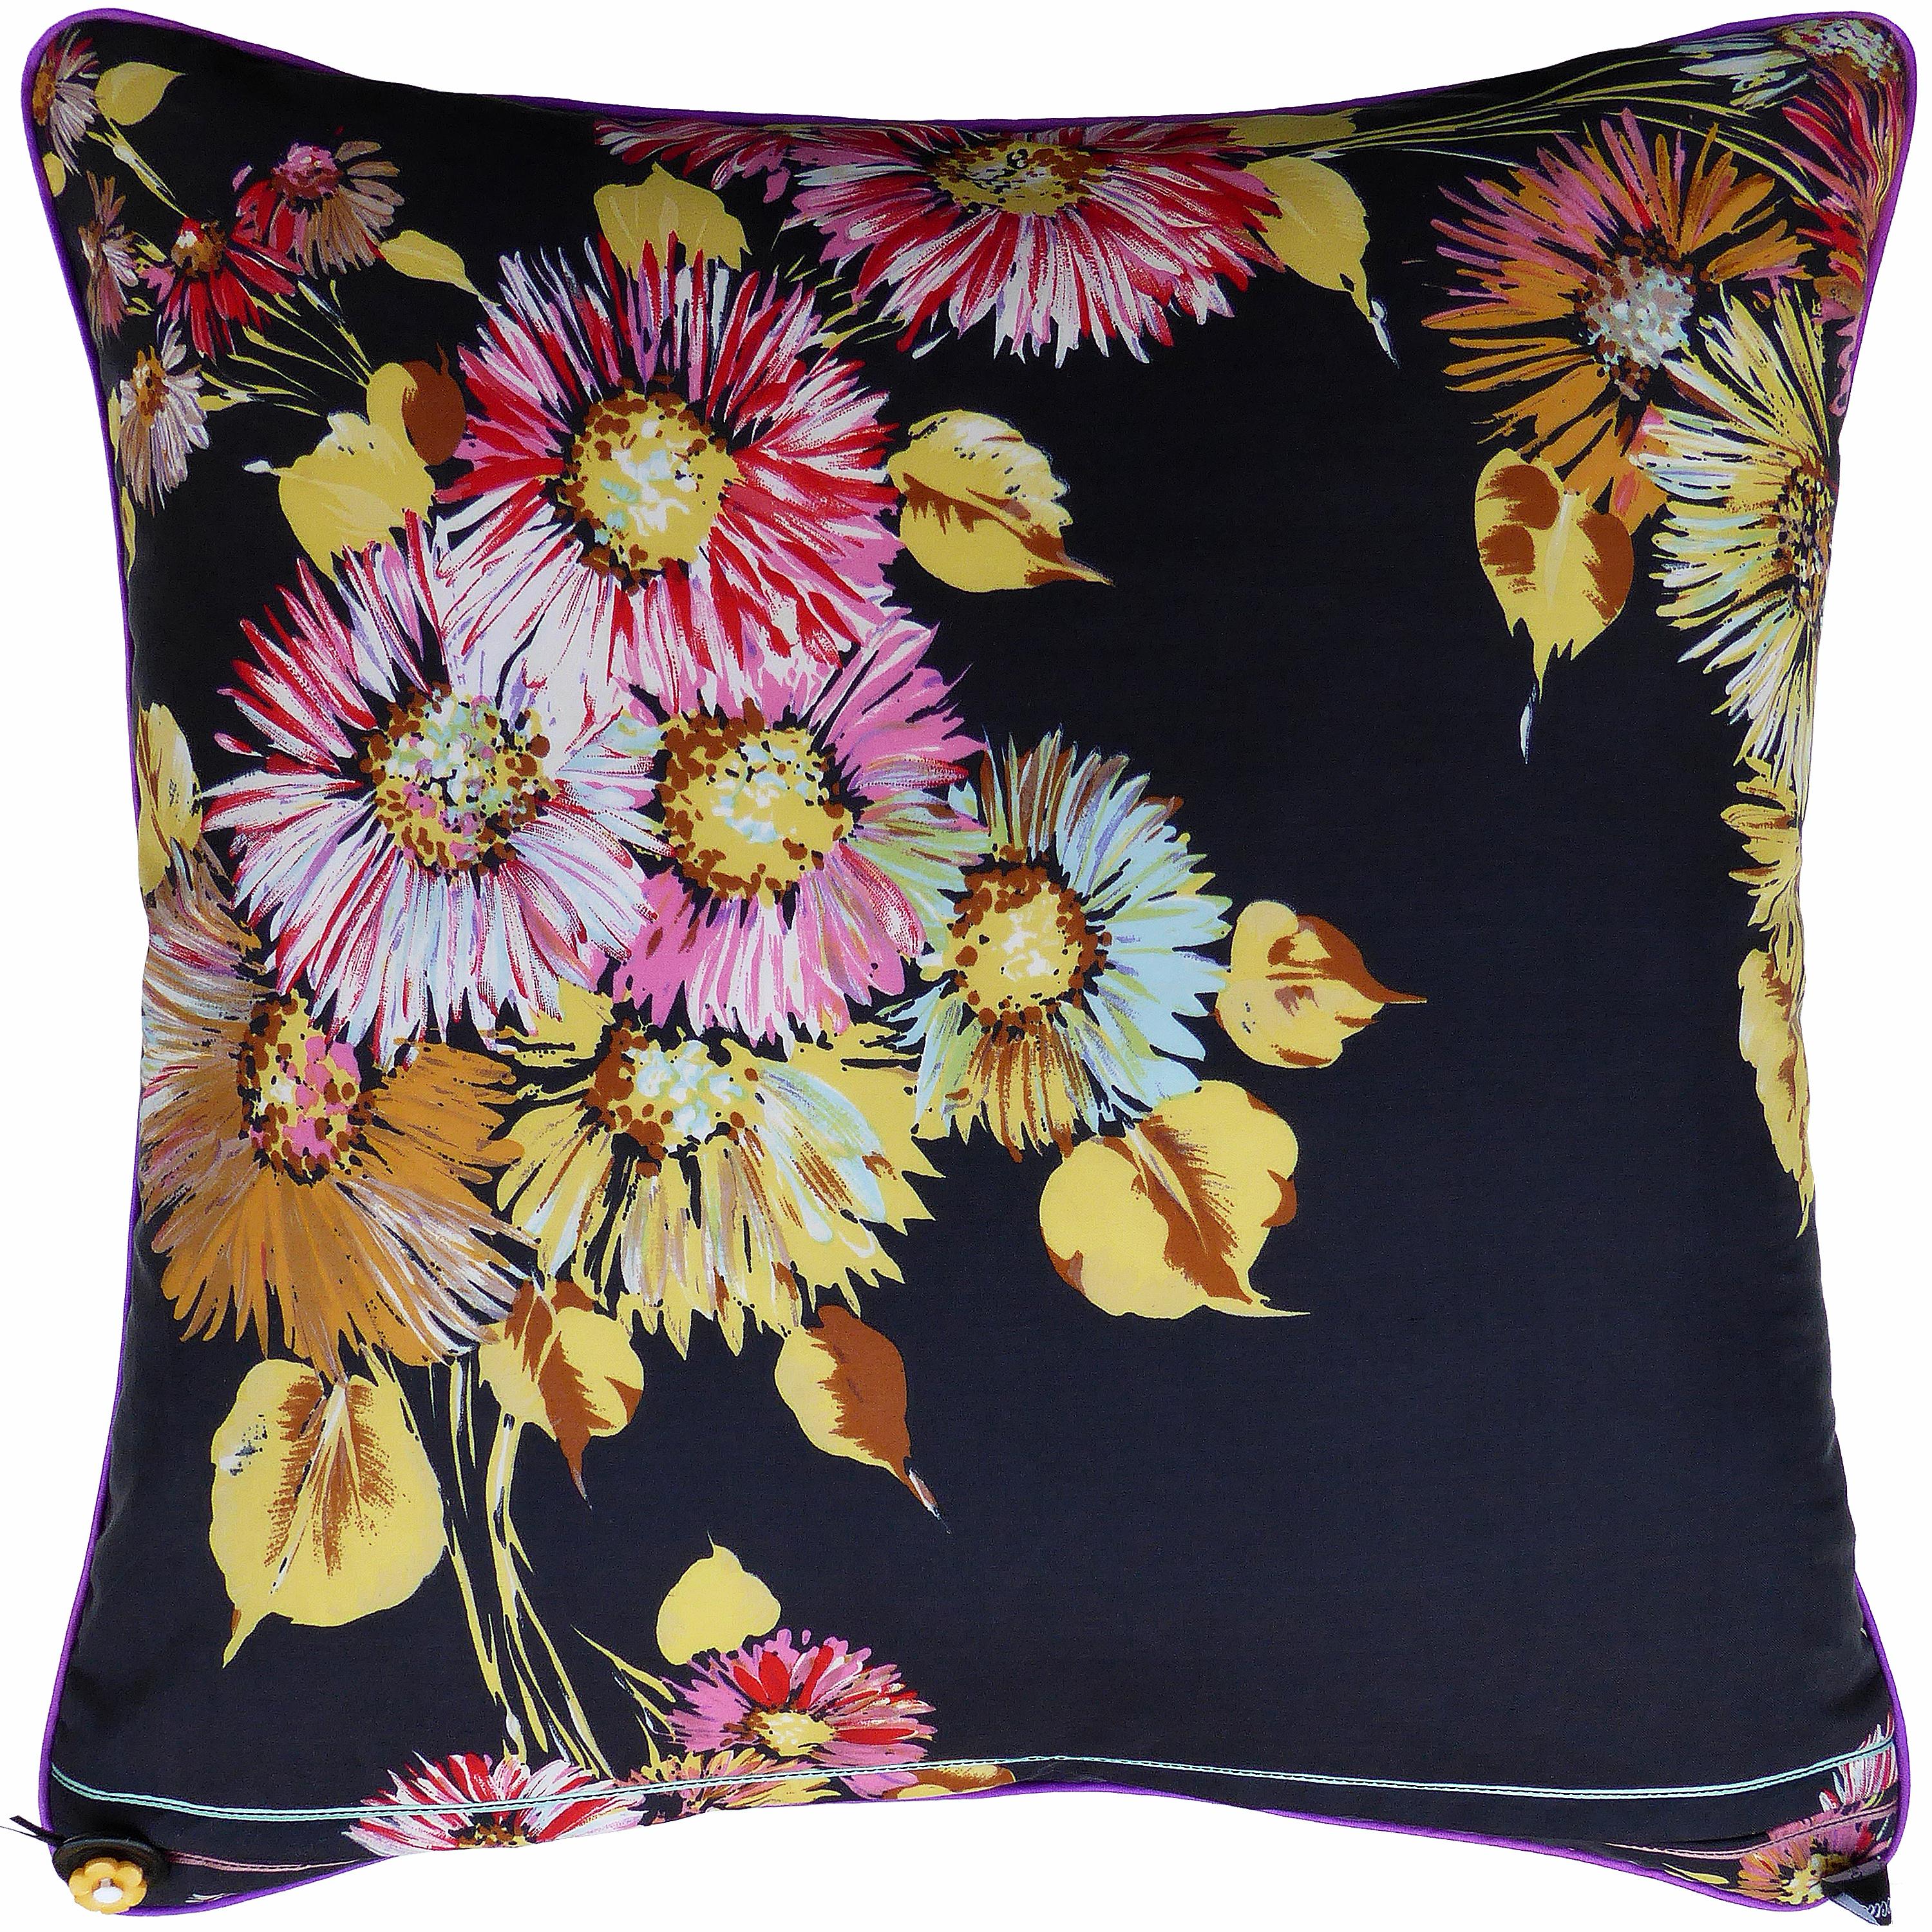 Hydrangeas
circa 1970 and 1980
British bespoke made luxury cushion created using original vintage silks with two beautiful and contrasting opposite sides, each featuring complimentary floral designs
Provenance; Britain
Made by Nichollette